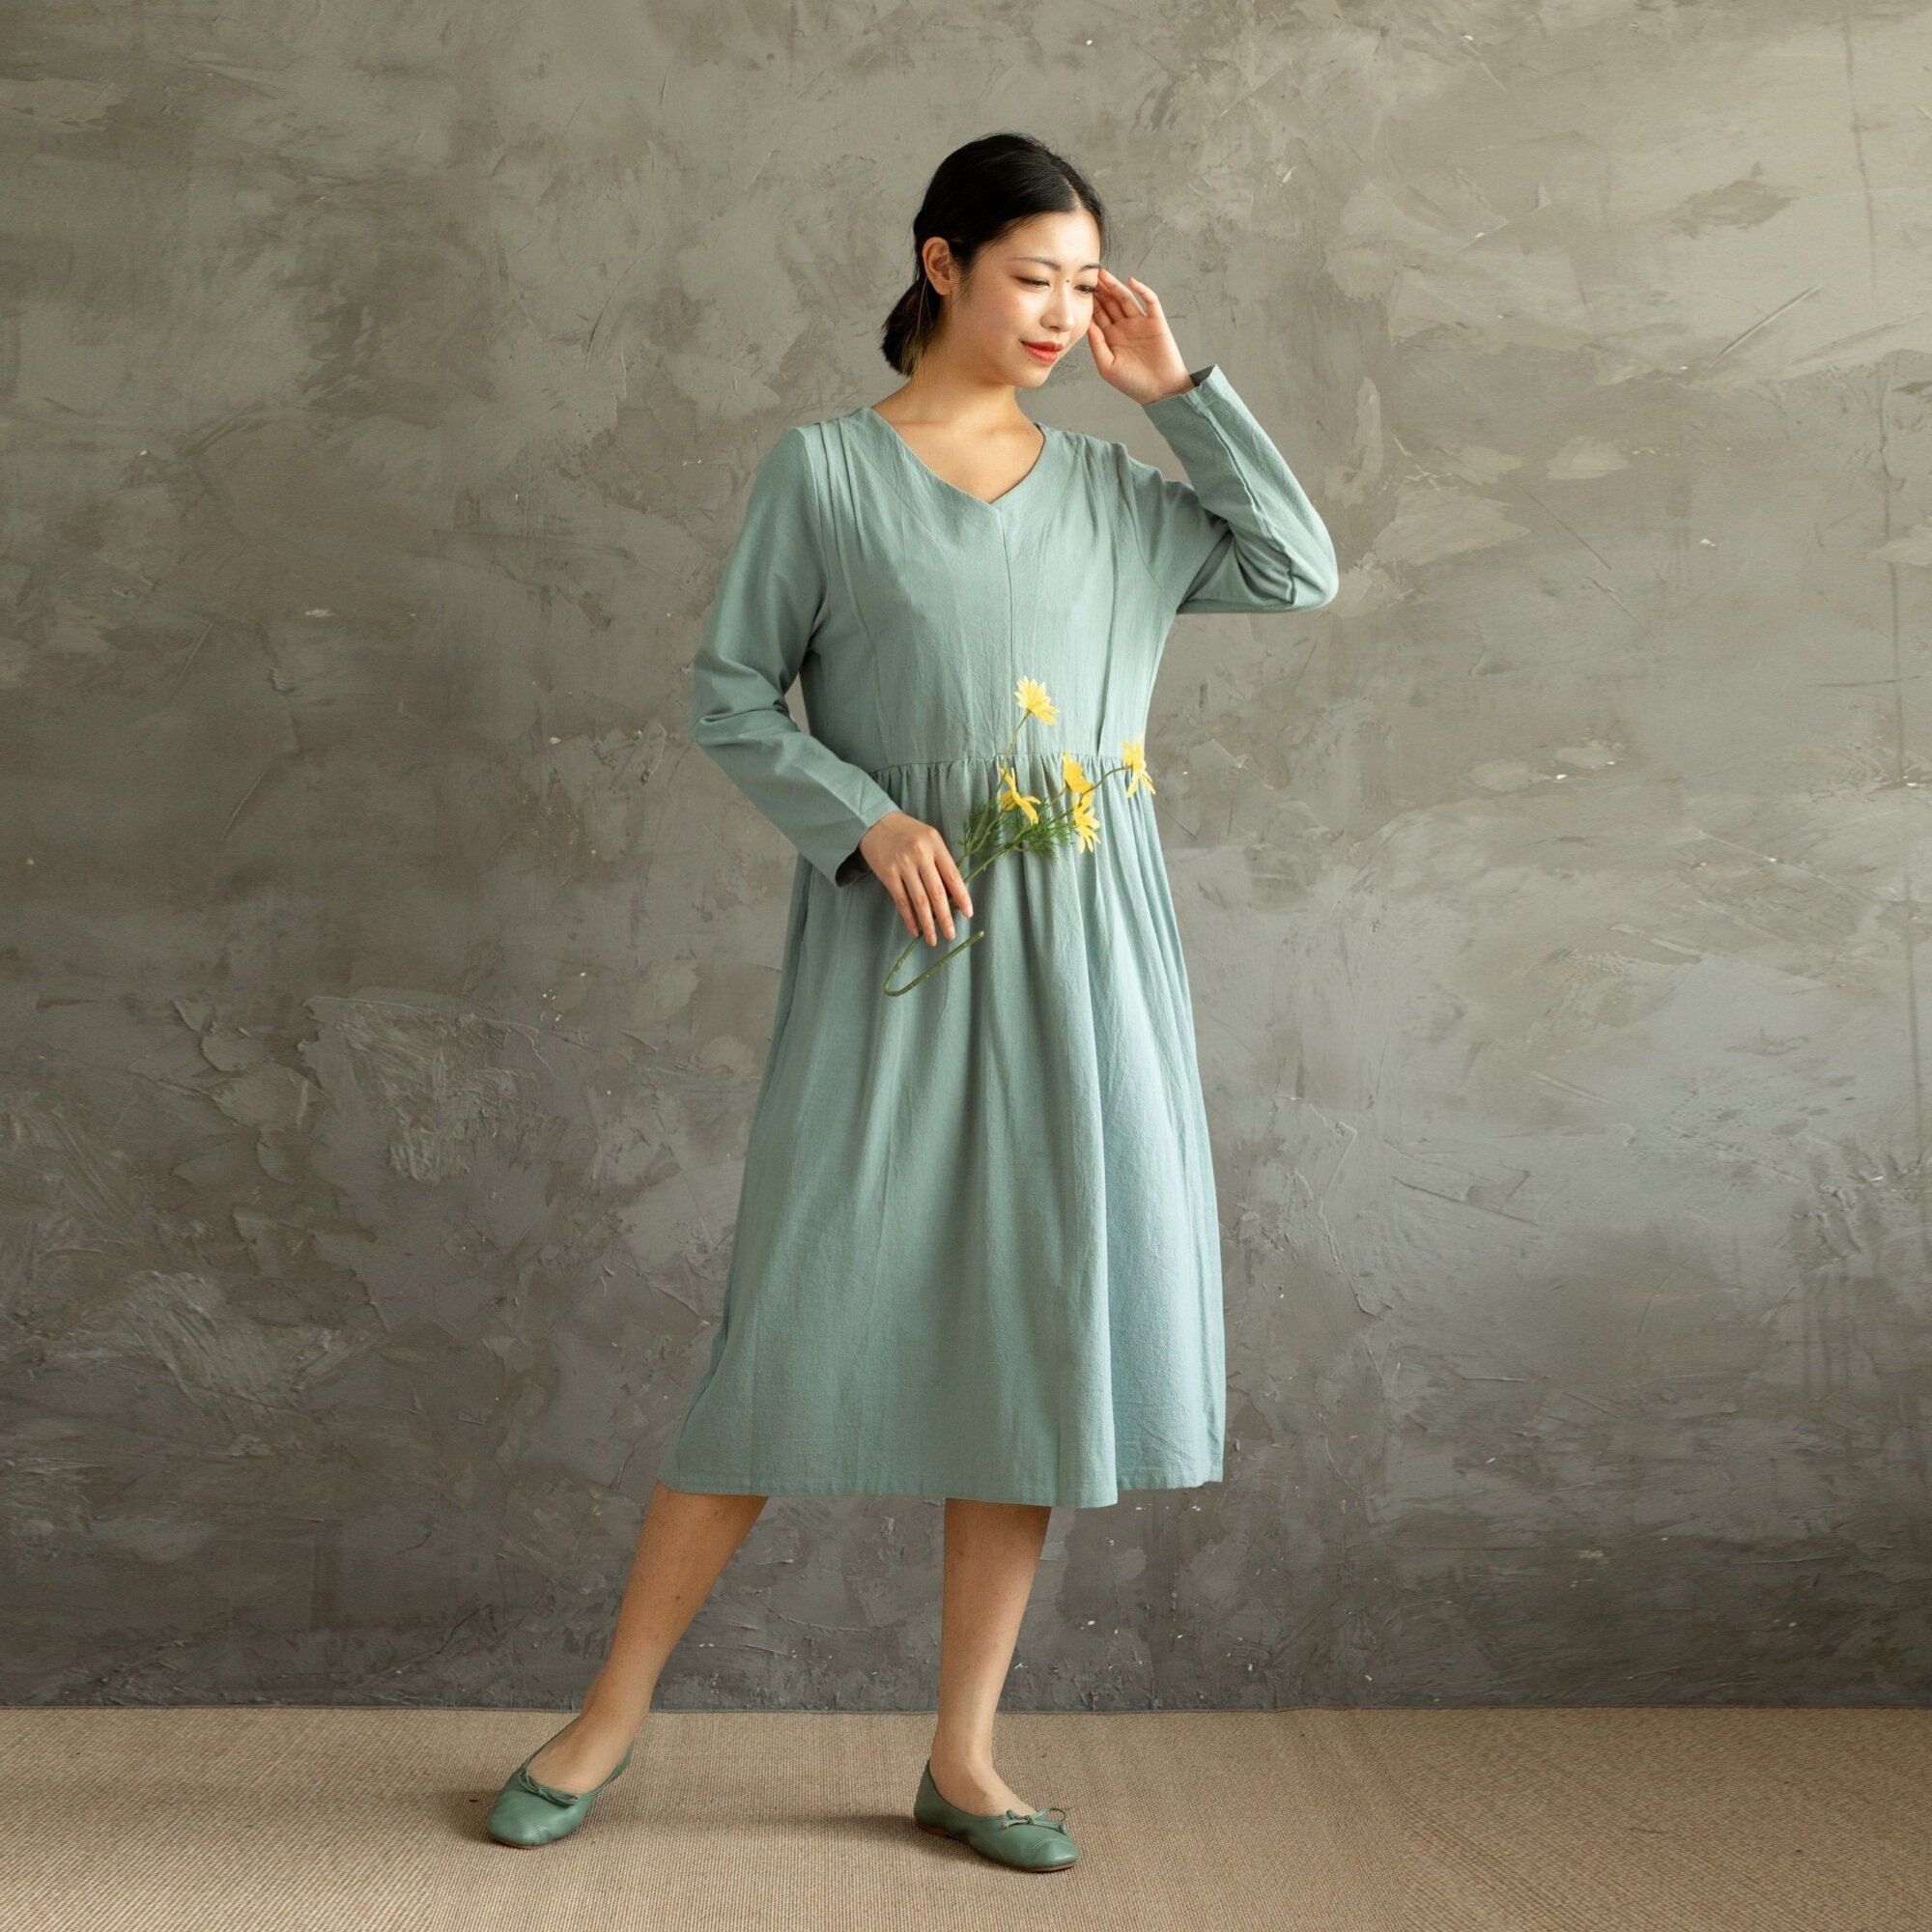 New Spring Cotton Dress V Neck Casual Loose Dress Tunics Long Sleeves Robes Knee Dresses Customized Dress Plus Size Clothing Linen Dress